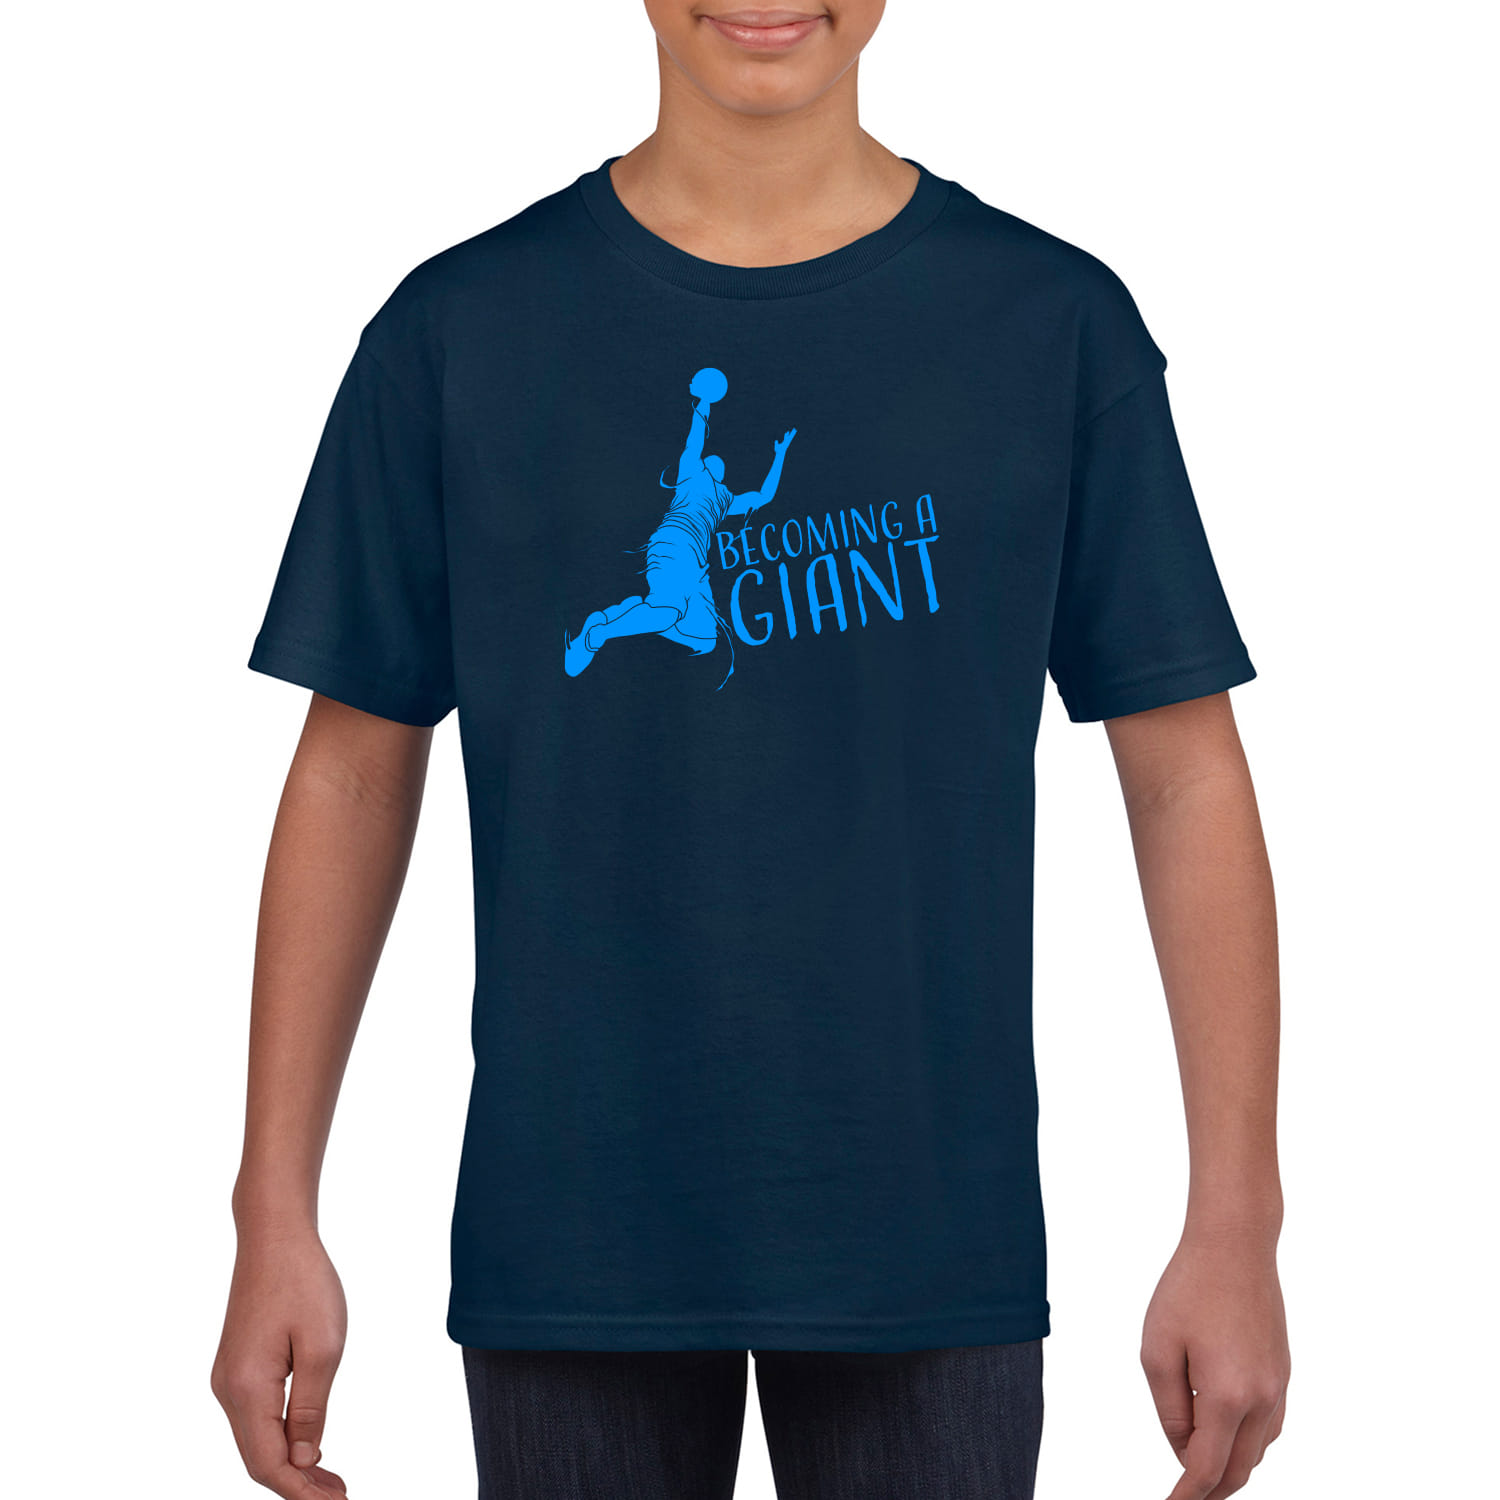 Kinder T-Shirt "Becoming a Giant"